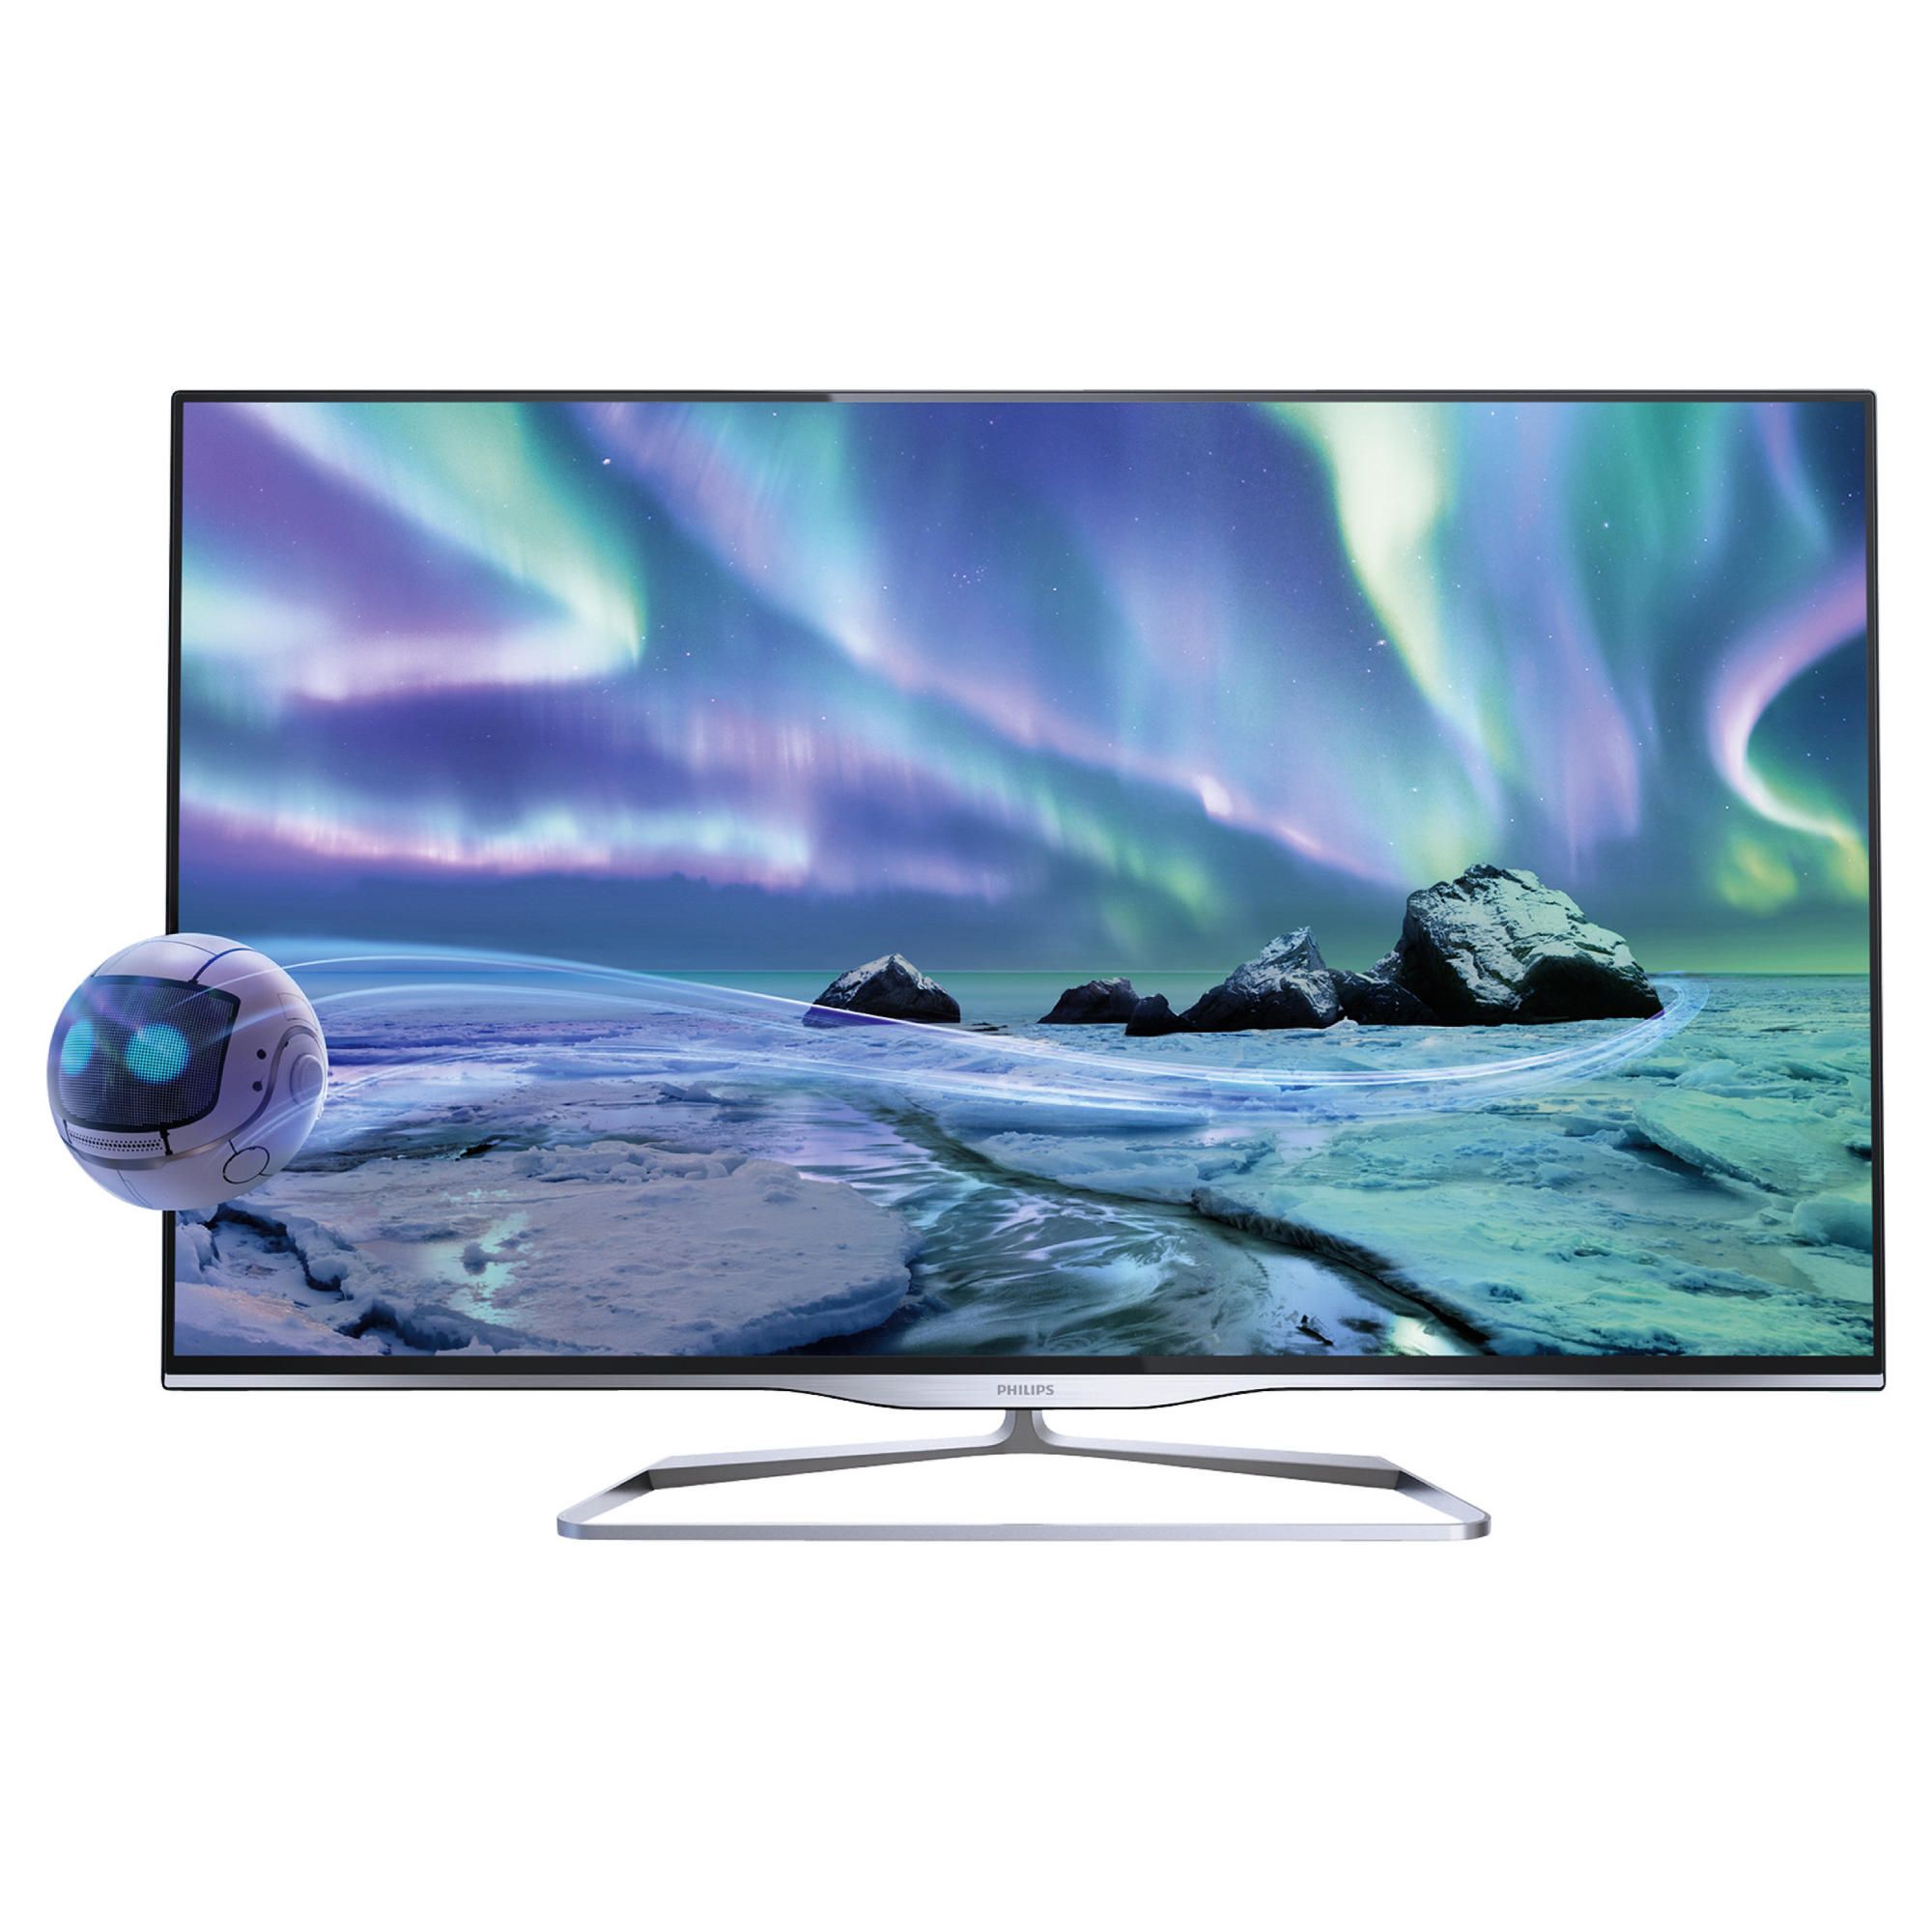 Philips 32PFL5008 32 inch Full HD 1080p 3D Smart LED TV with Ambilight